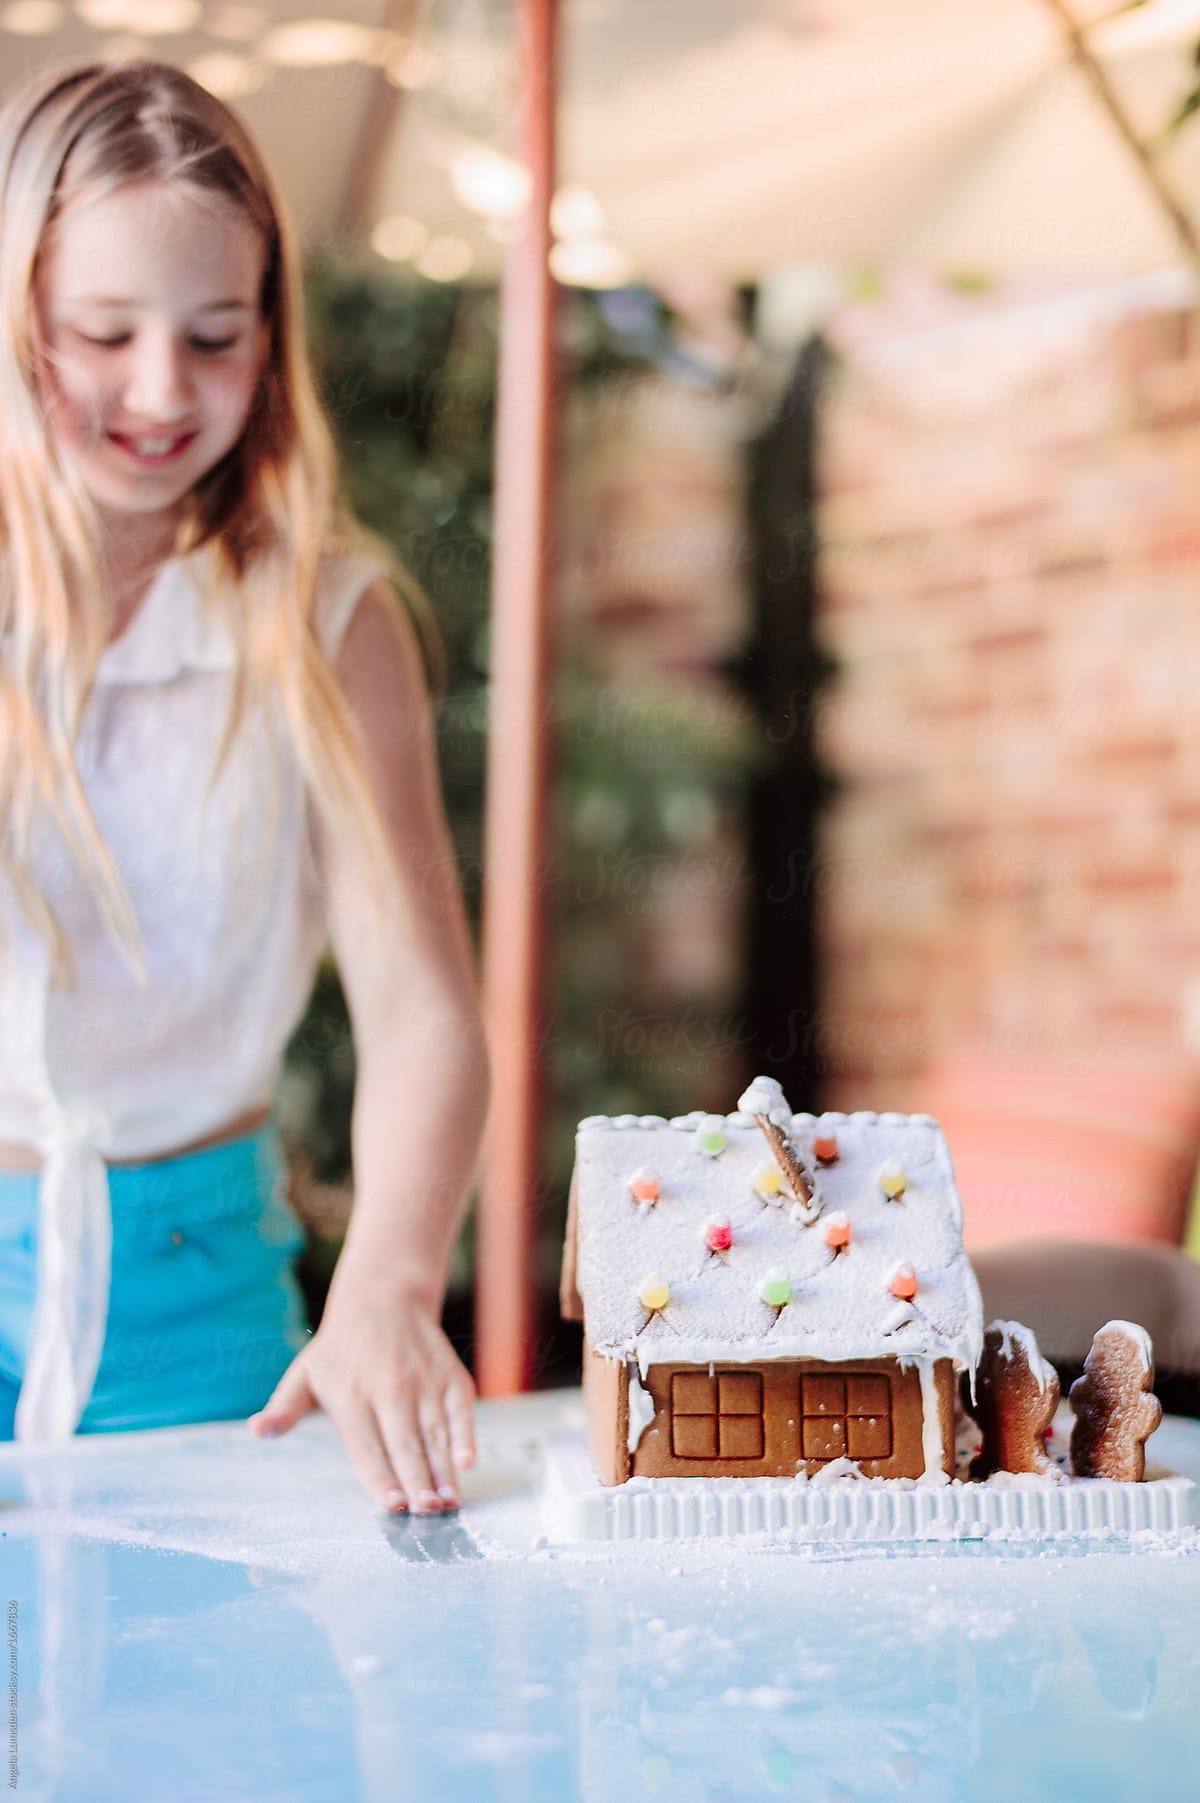 Tween girl with a gingerbread house at christmas